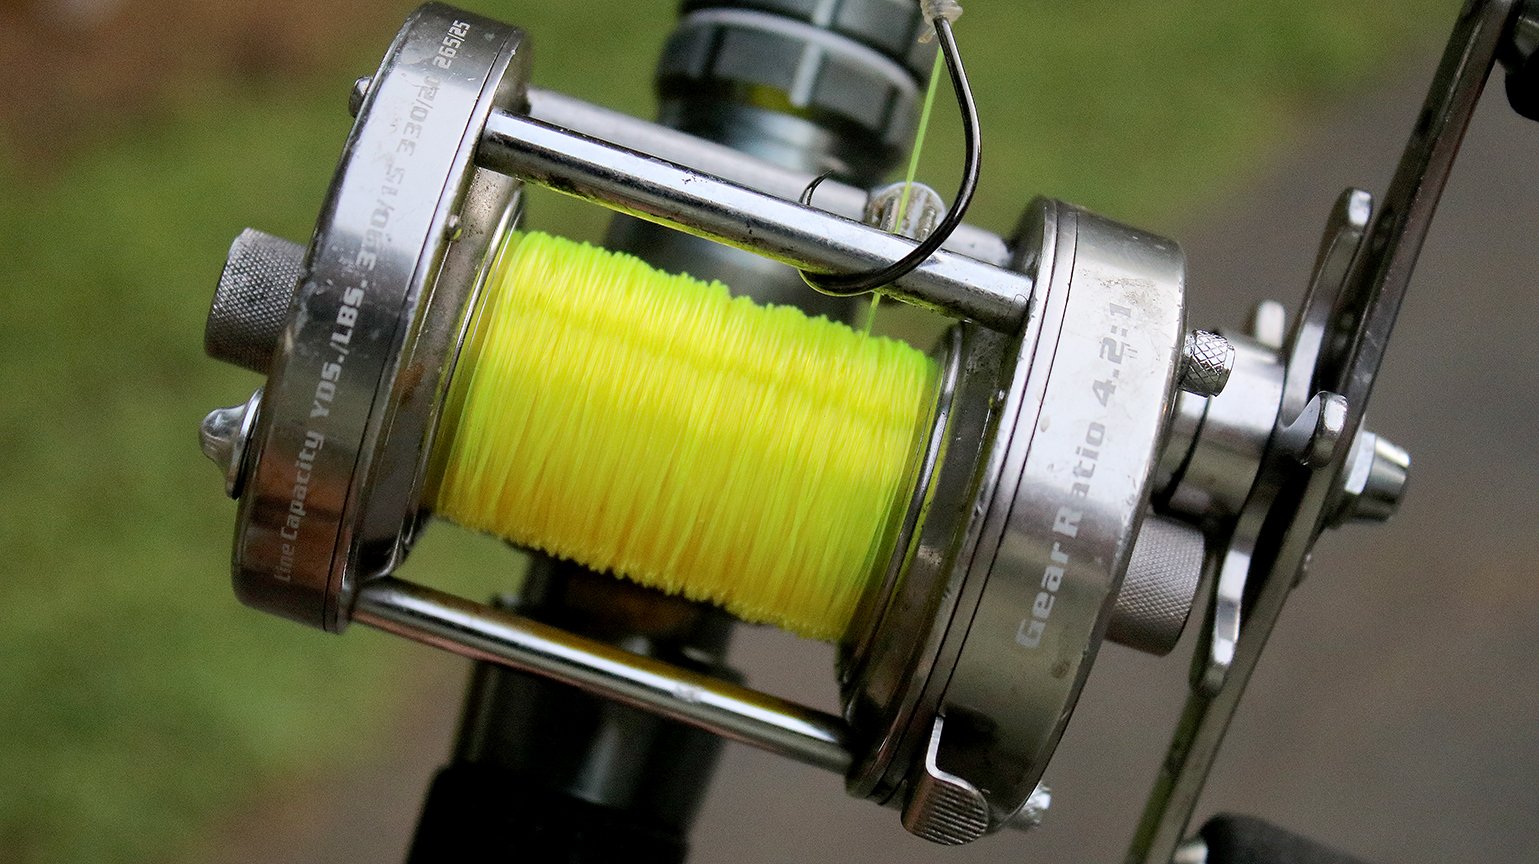 Is This the Best Catfish Reel for the Money?